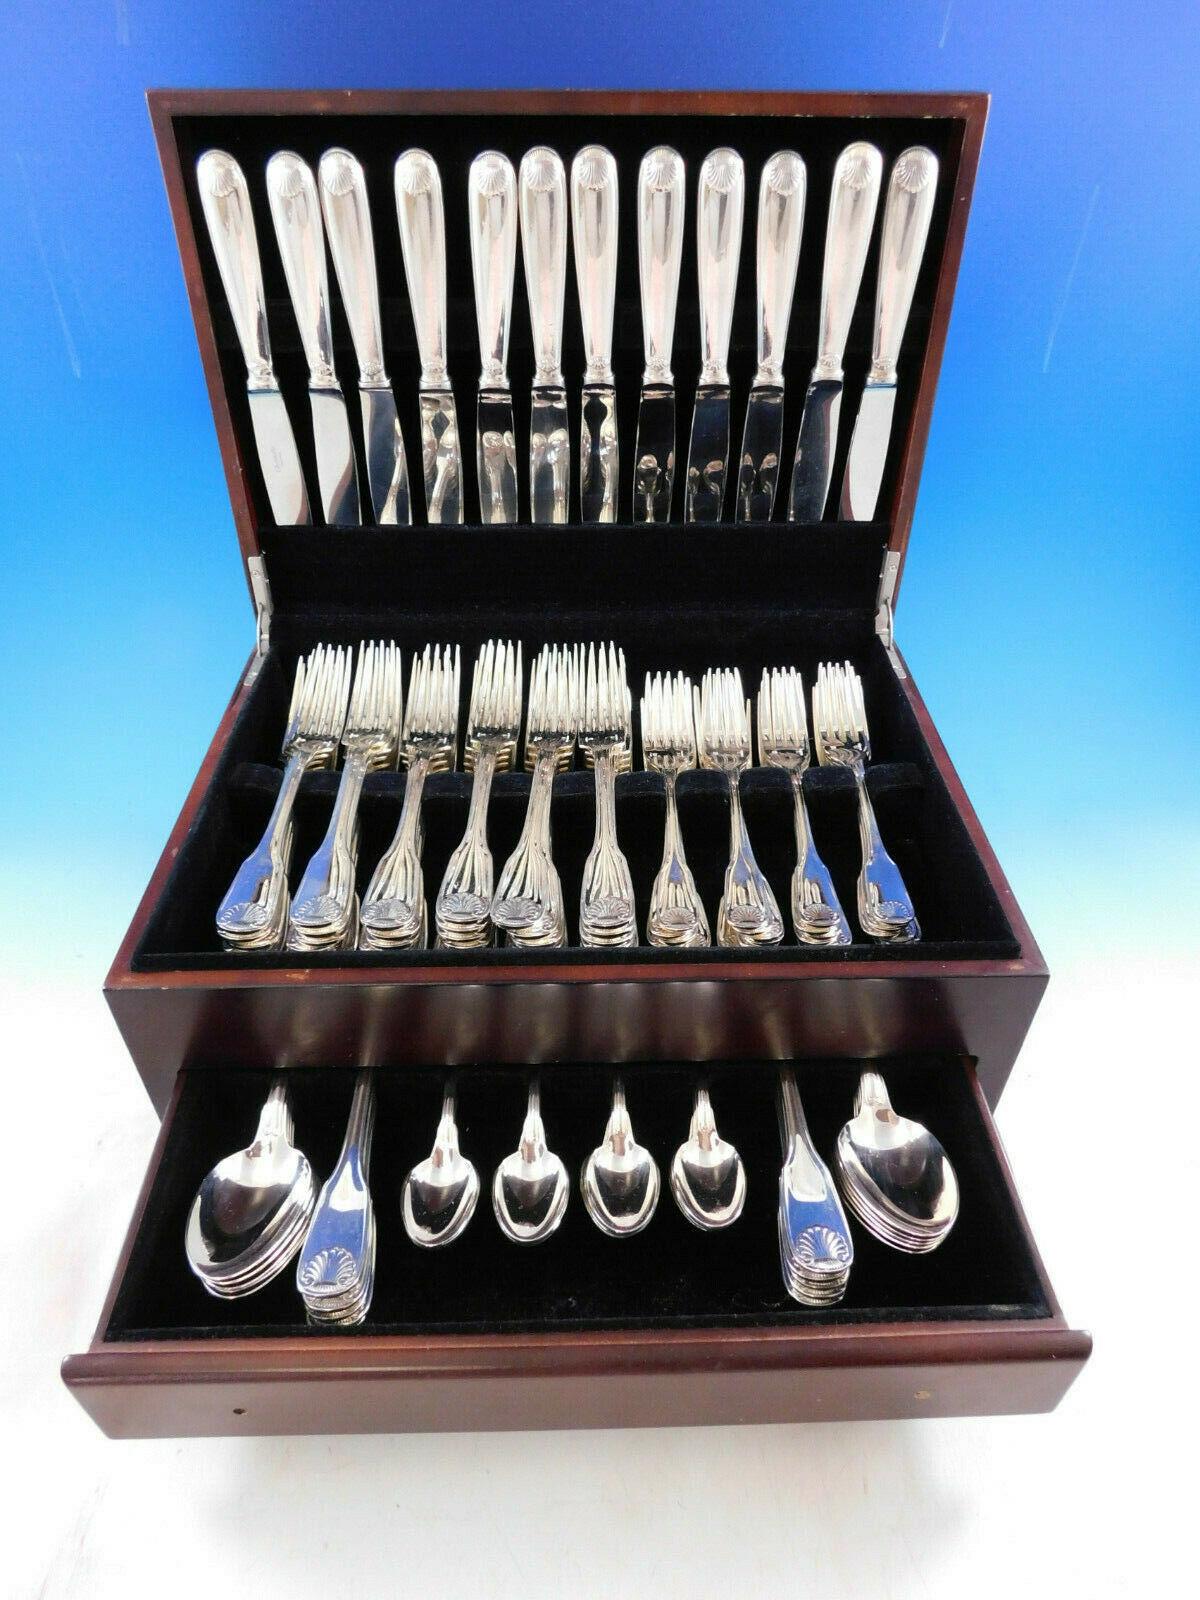 Dinner Size Vendome Arcantia by Christofle France Silverplated flatware set, 144 pieces. This pattern featured the same shell motif that adorned the ceremonial silverware used during the reign of King Louis XIV. This set includes:

24 Dinner Size